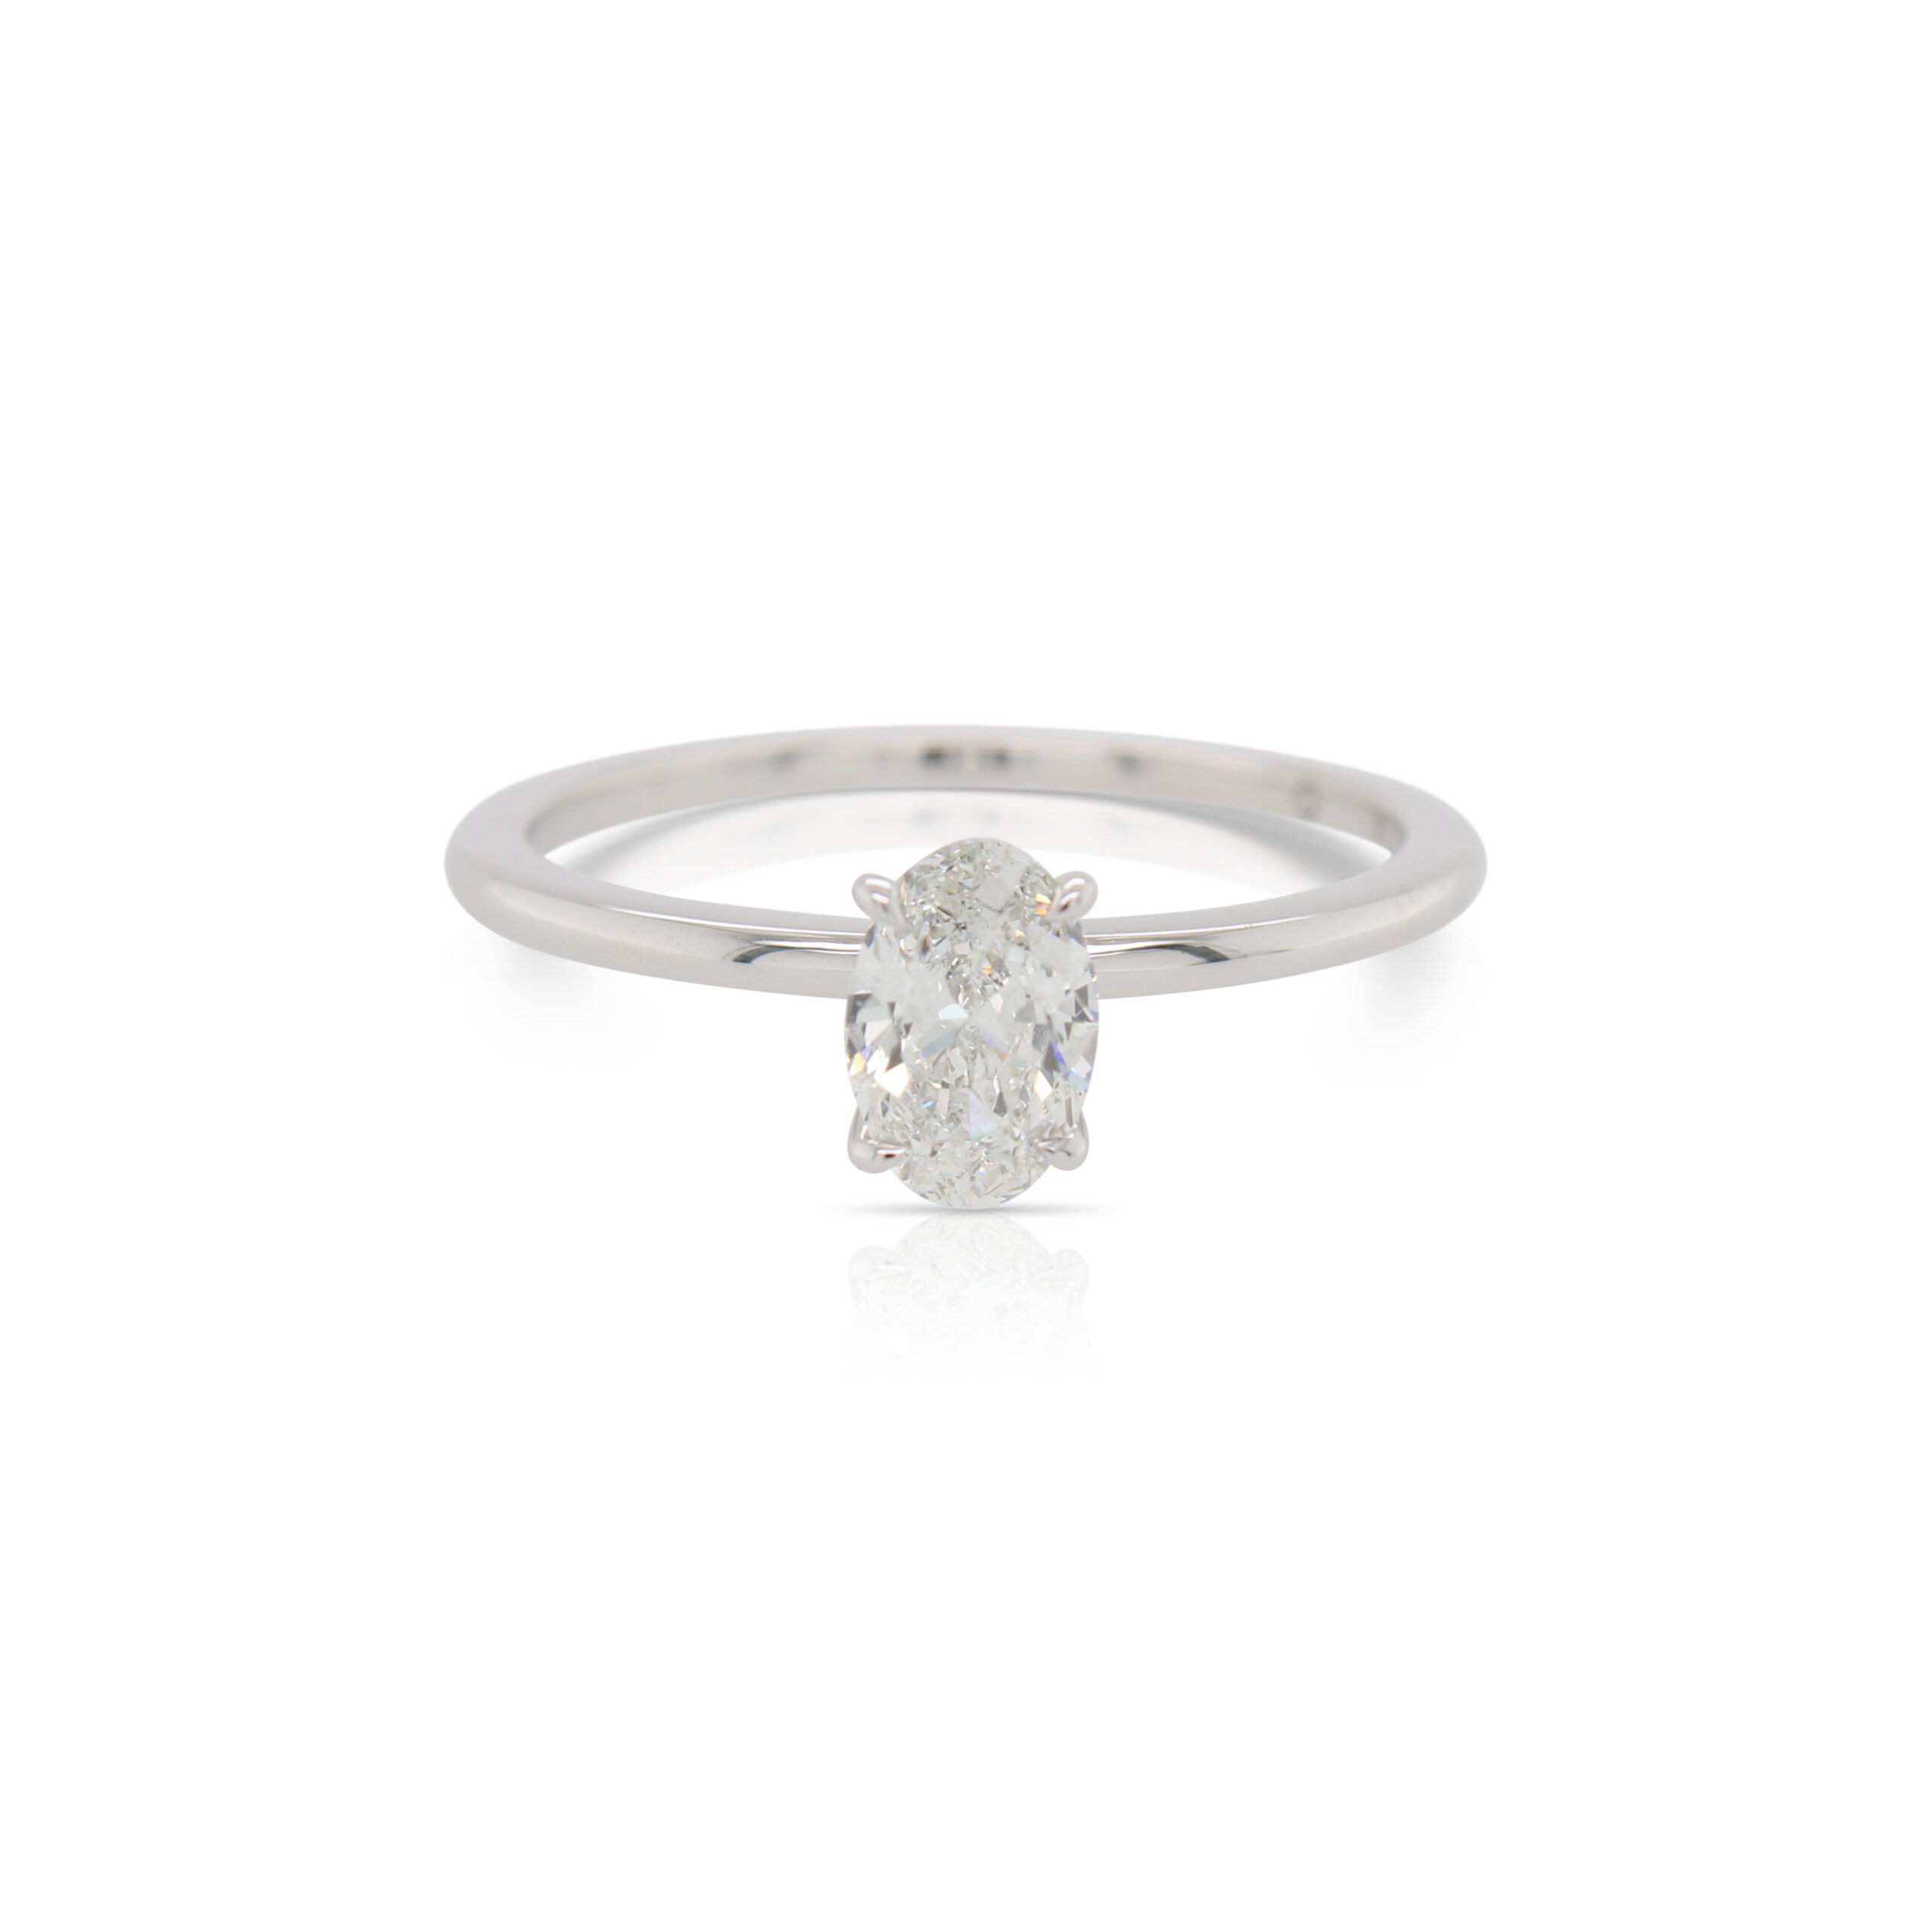 021659Oval-Diamond-Solitaire-Engagement-Ring.jpg